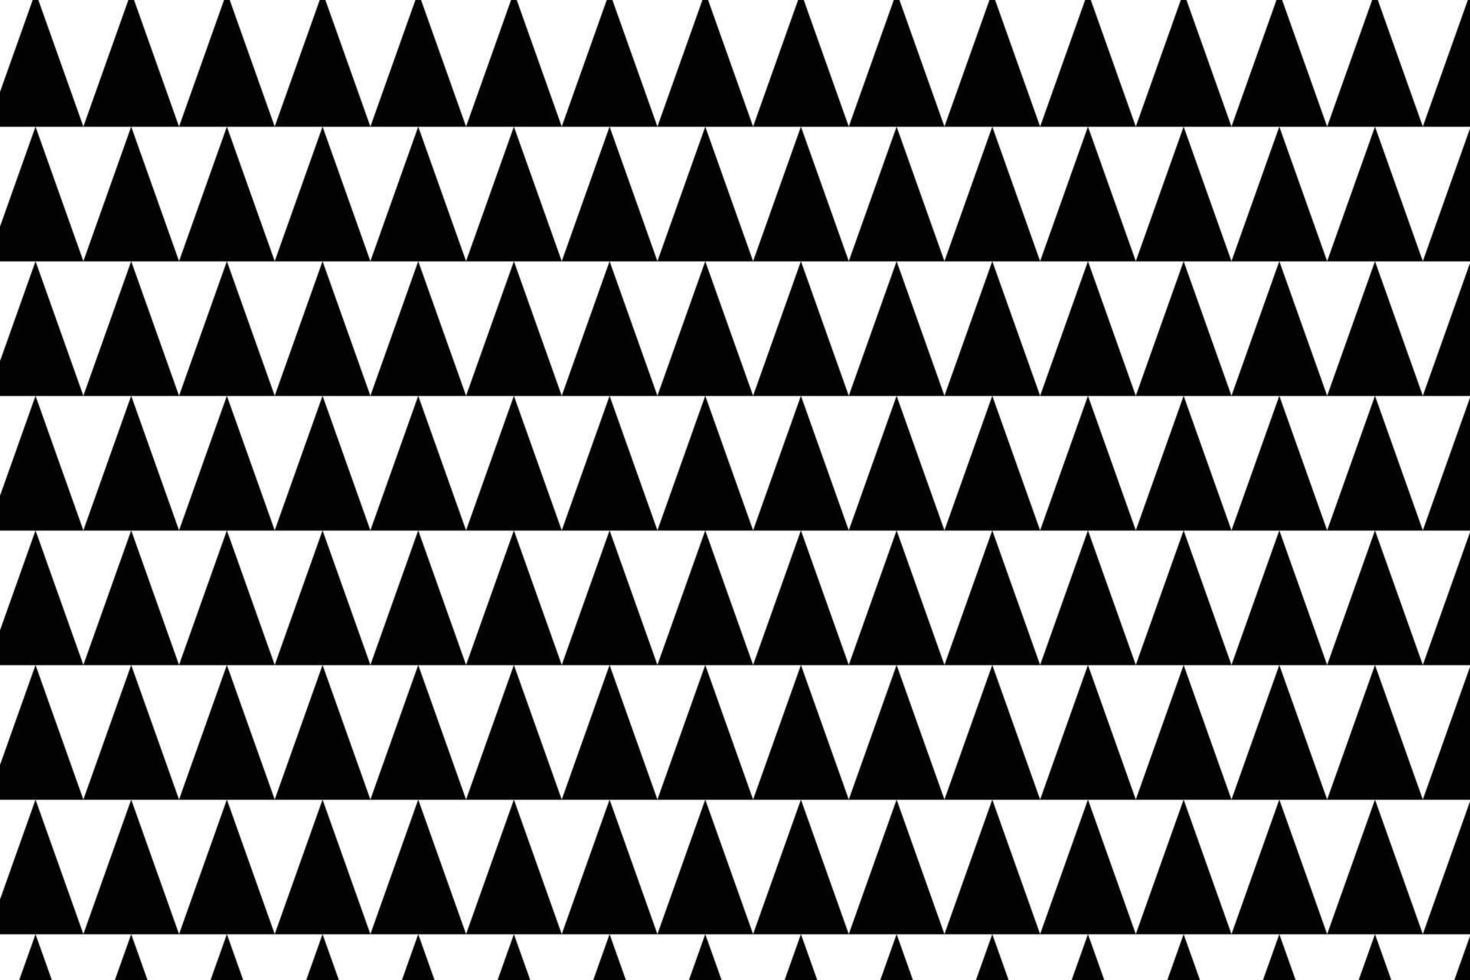 creative triangle style pattern, black white memphis group pattern. vector